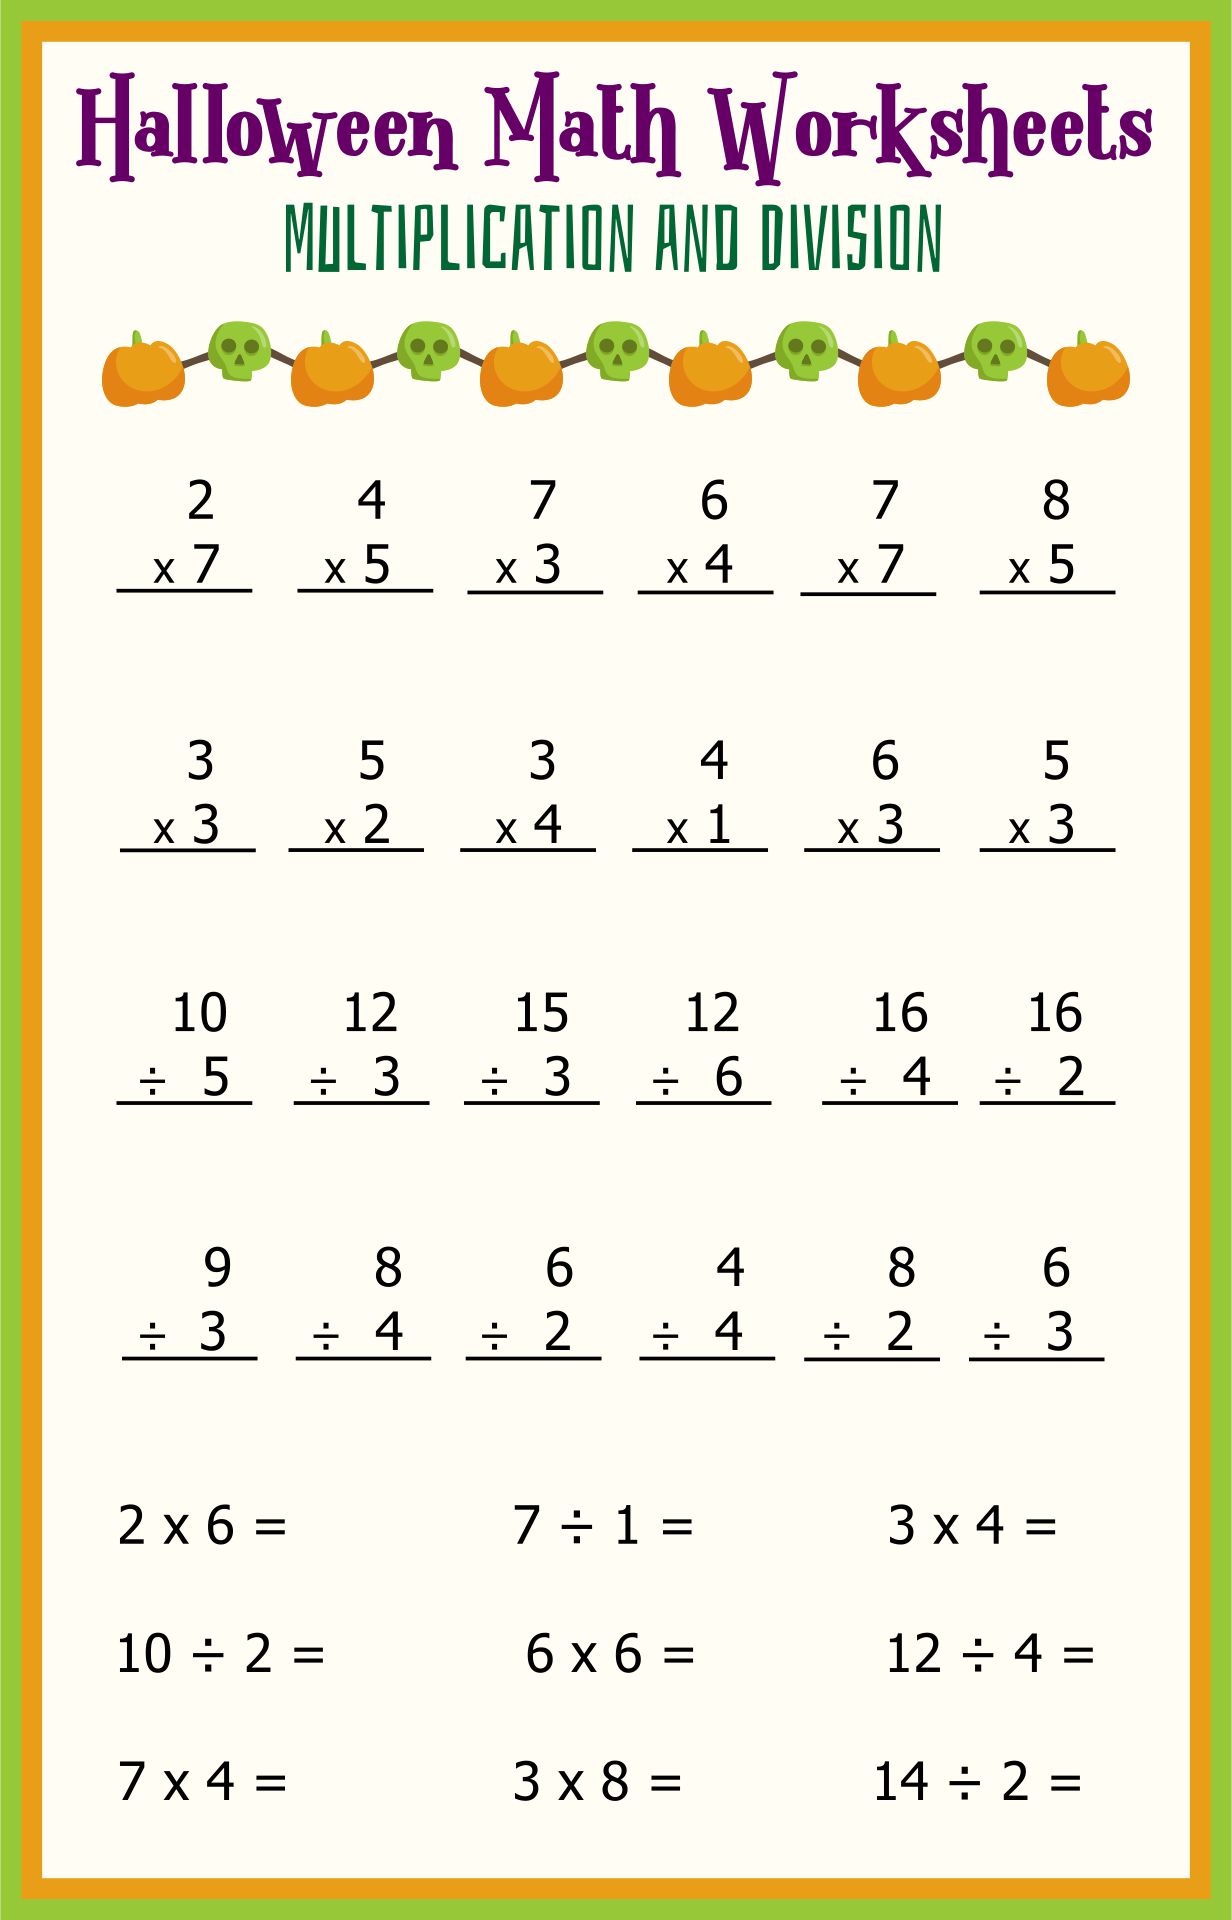 Printable 3rd Grade Halloween Math Worksheets Multiplication And Division